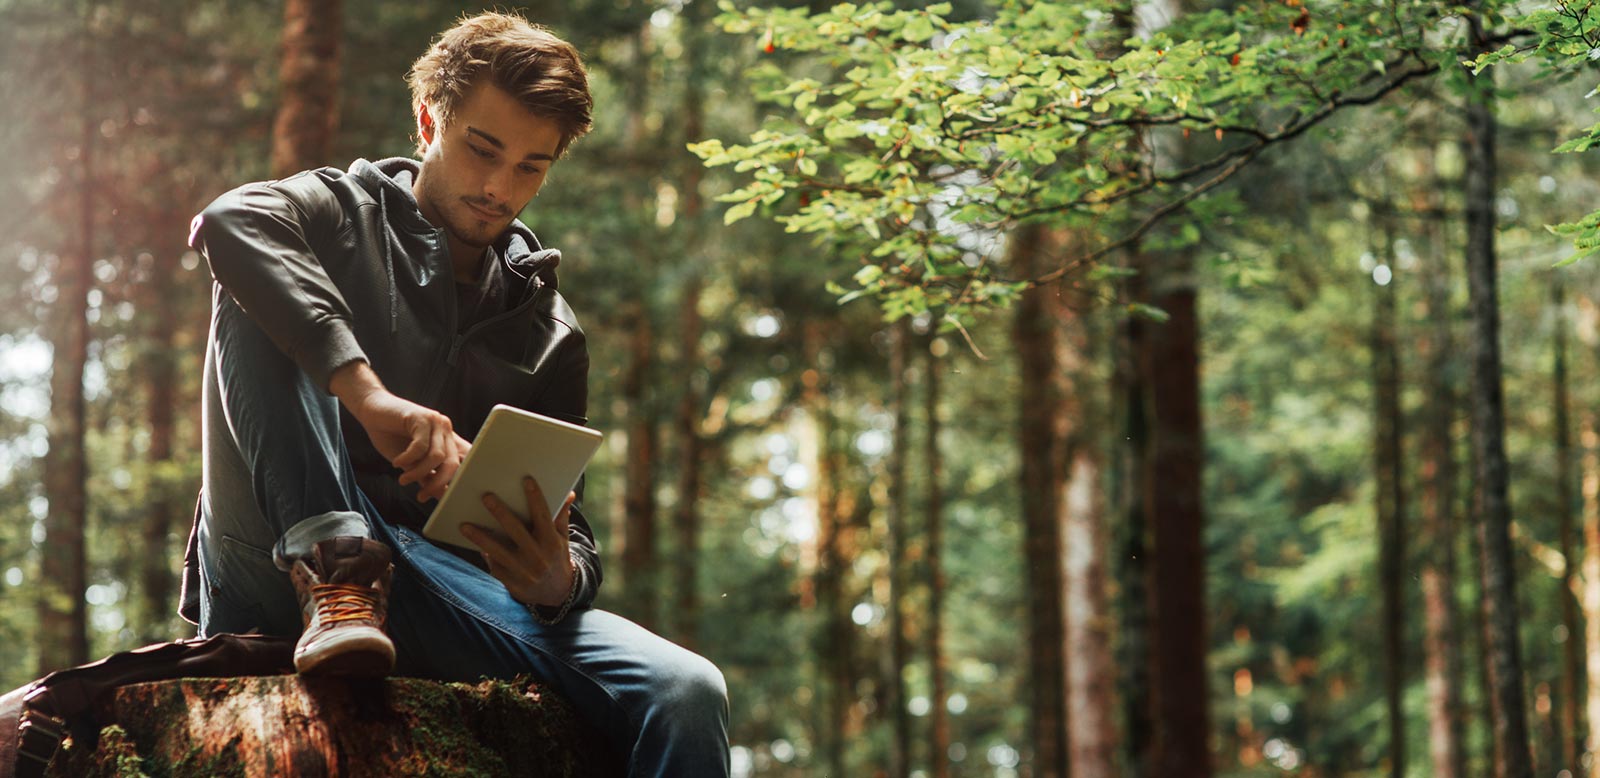 Young man using tablet in woods